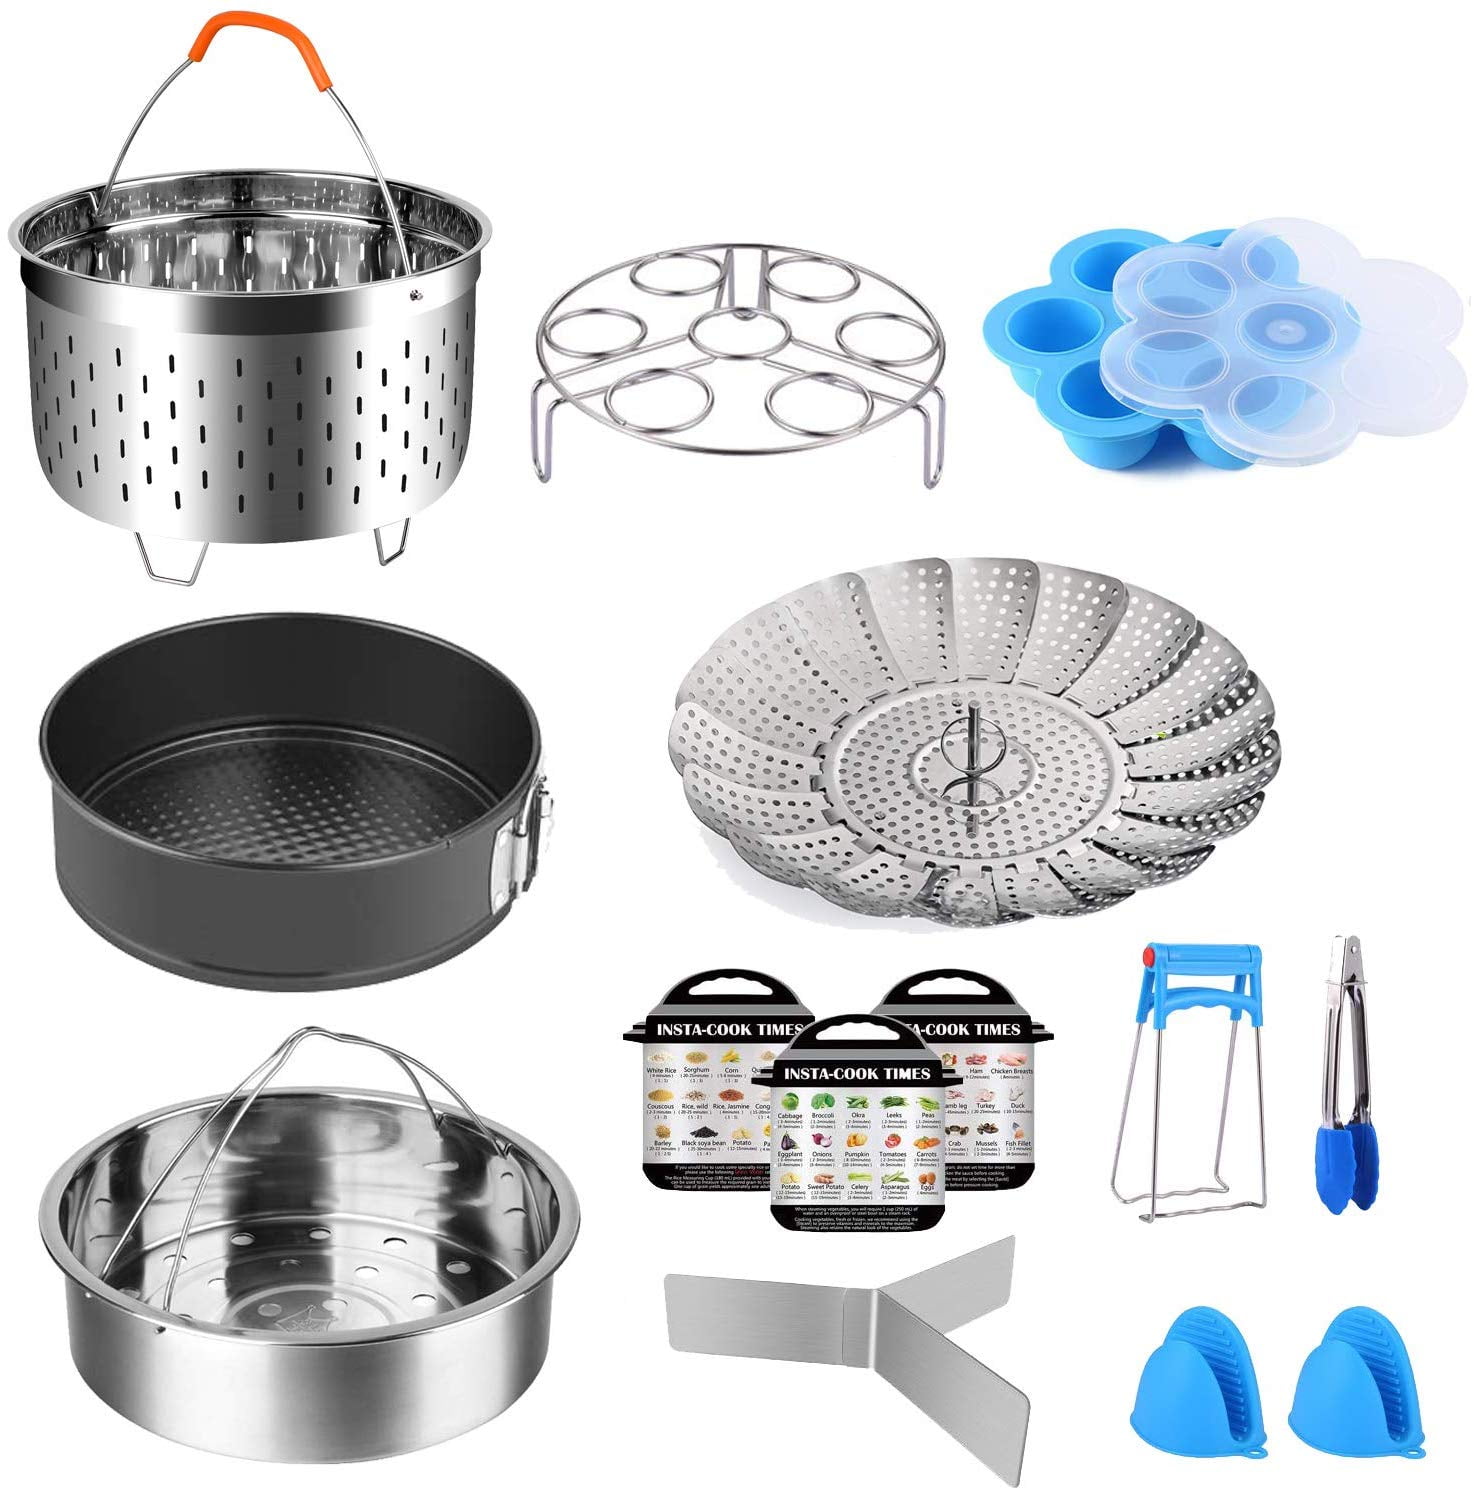 Oven Mitts Non-Stick Springform Pan Egg Bites Mold Large Stainless Steel Steamer Basket 8 Qt Bowl Clip and Silicone Scrub Pad Egg Rack 9 Piece Accessories Kits Compatible with Instant Pot 6 